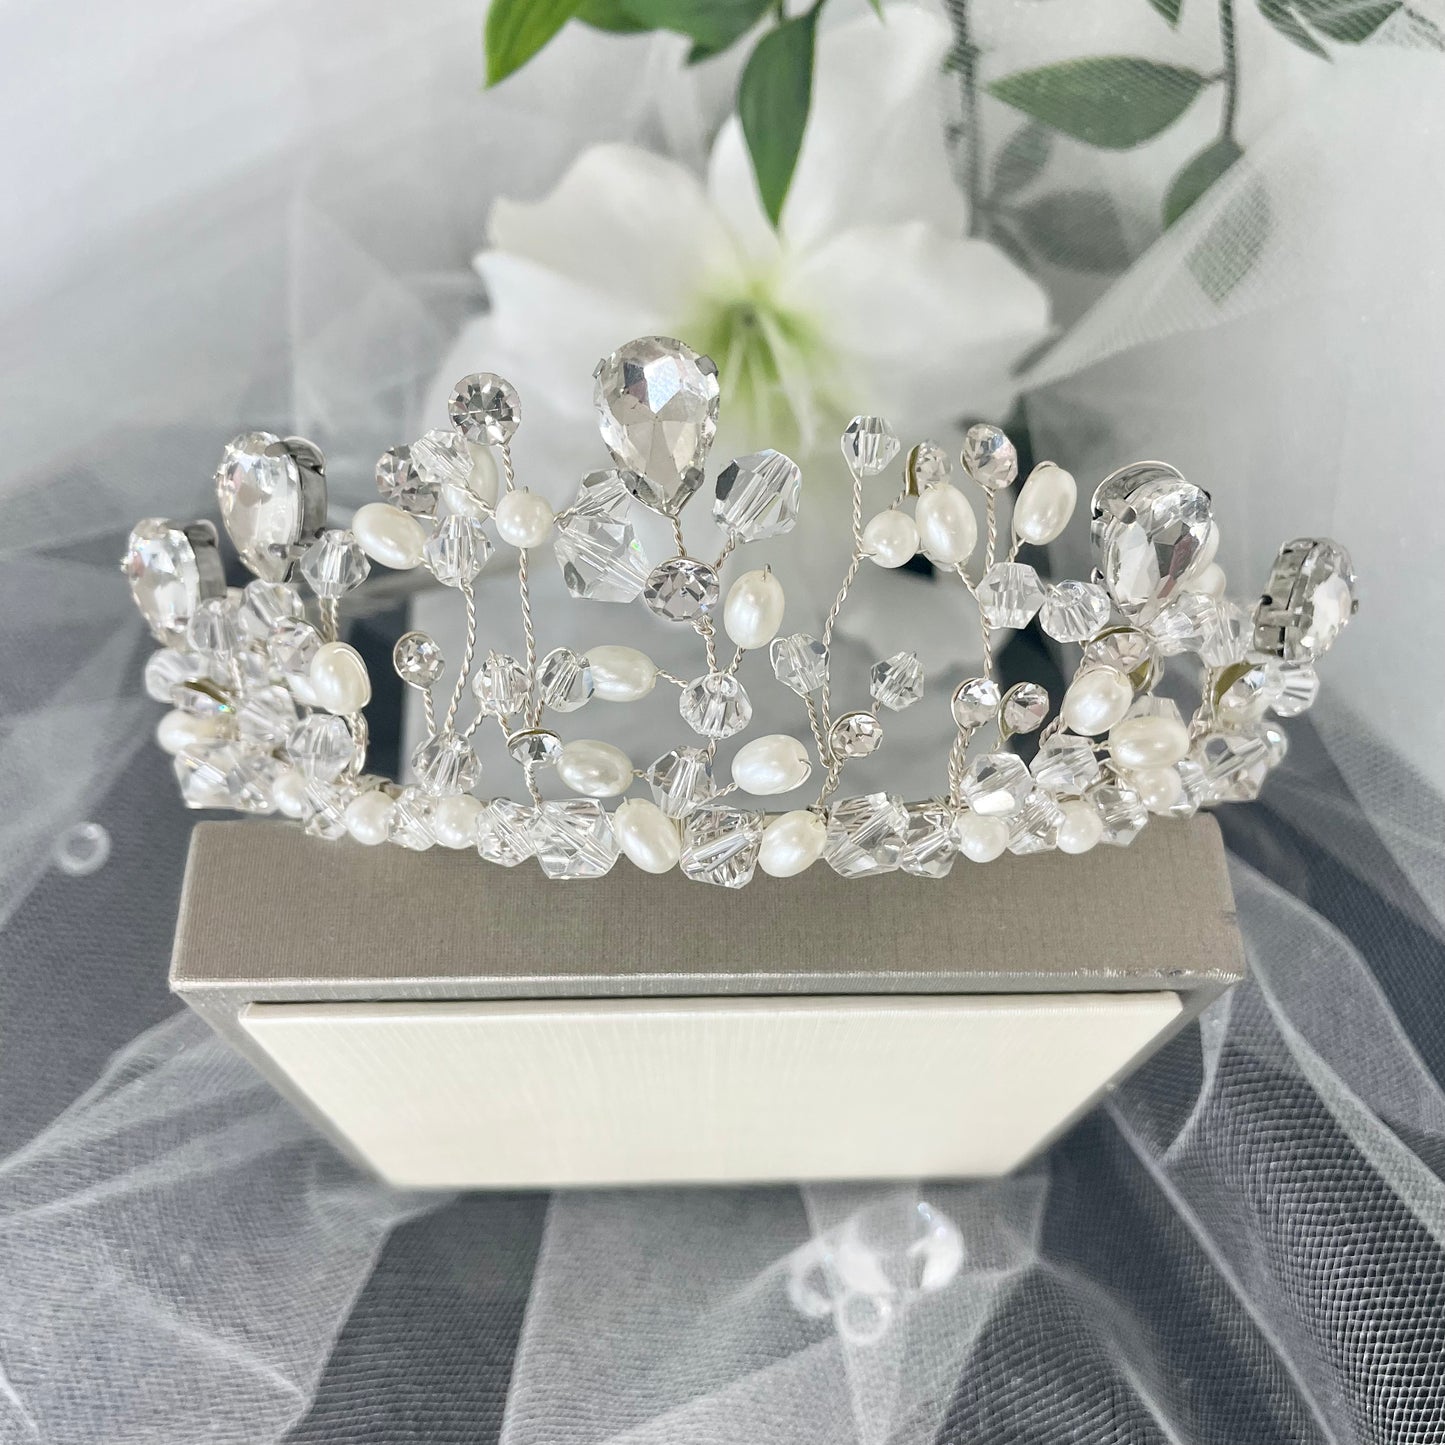 "Amara Tiara: Exquisite Handcrafted Crystal and Pearl Adorned Masterpiece."